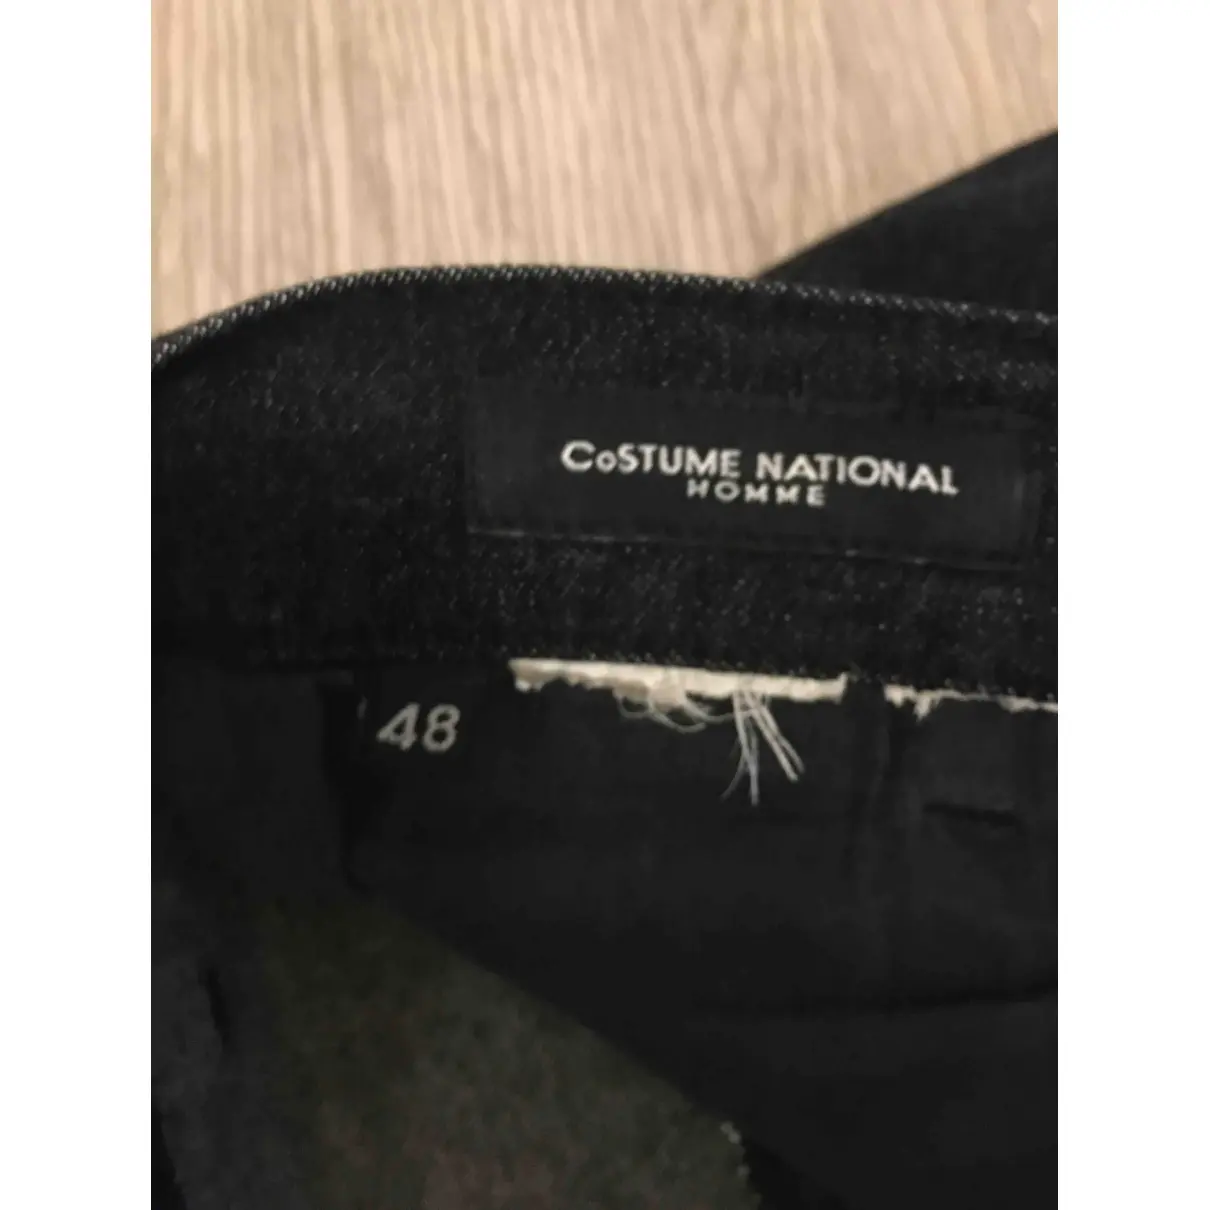 Buy Costume National Straight jeans online